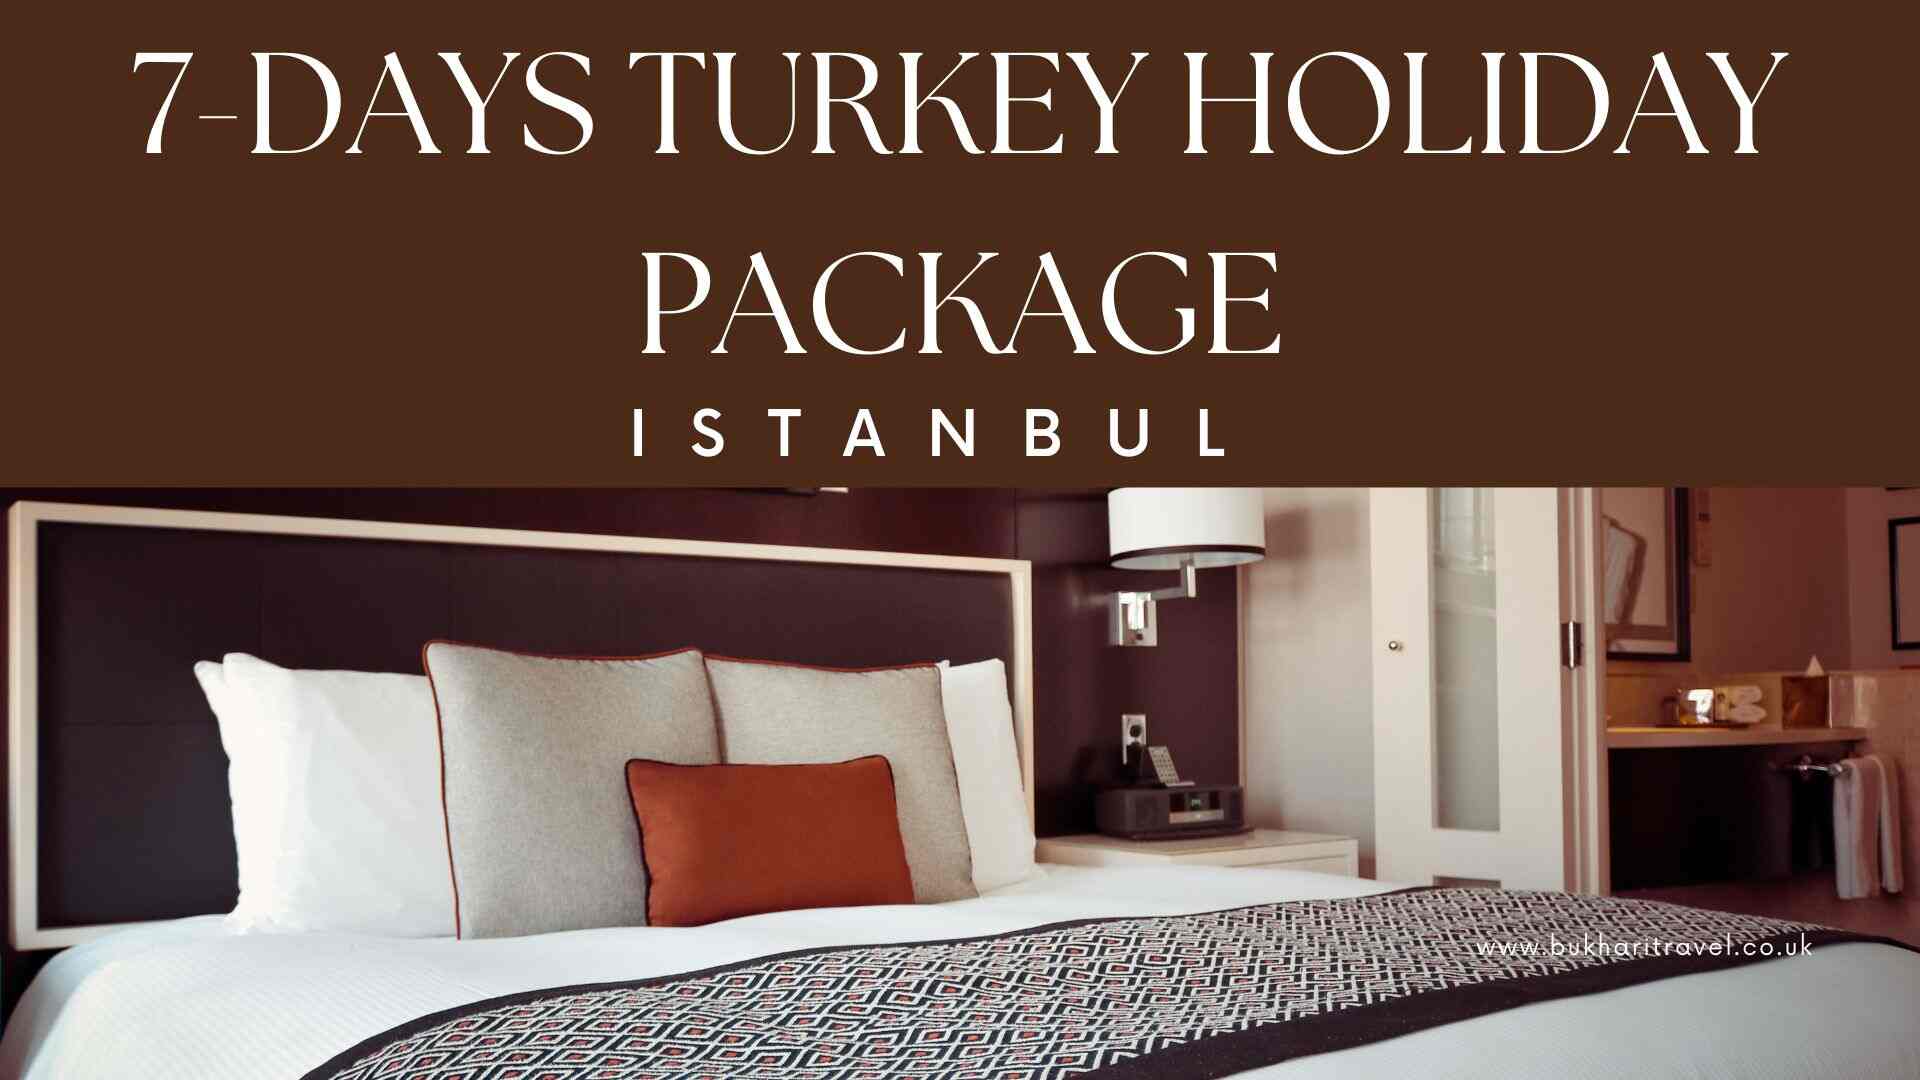 7 Days turkey Holiday Package